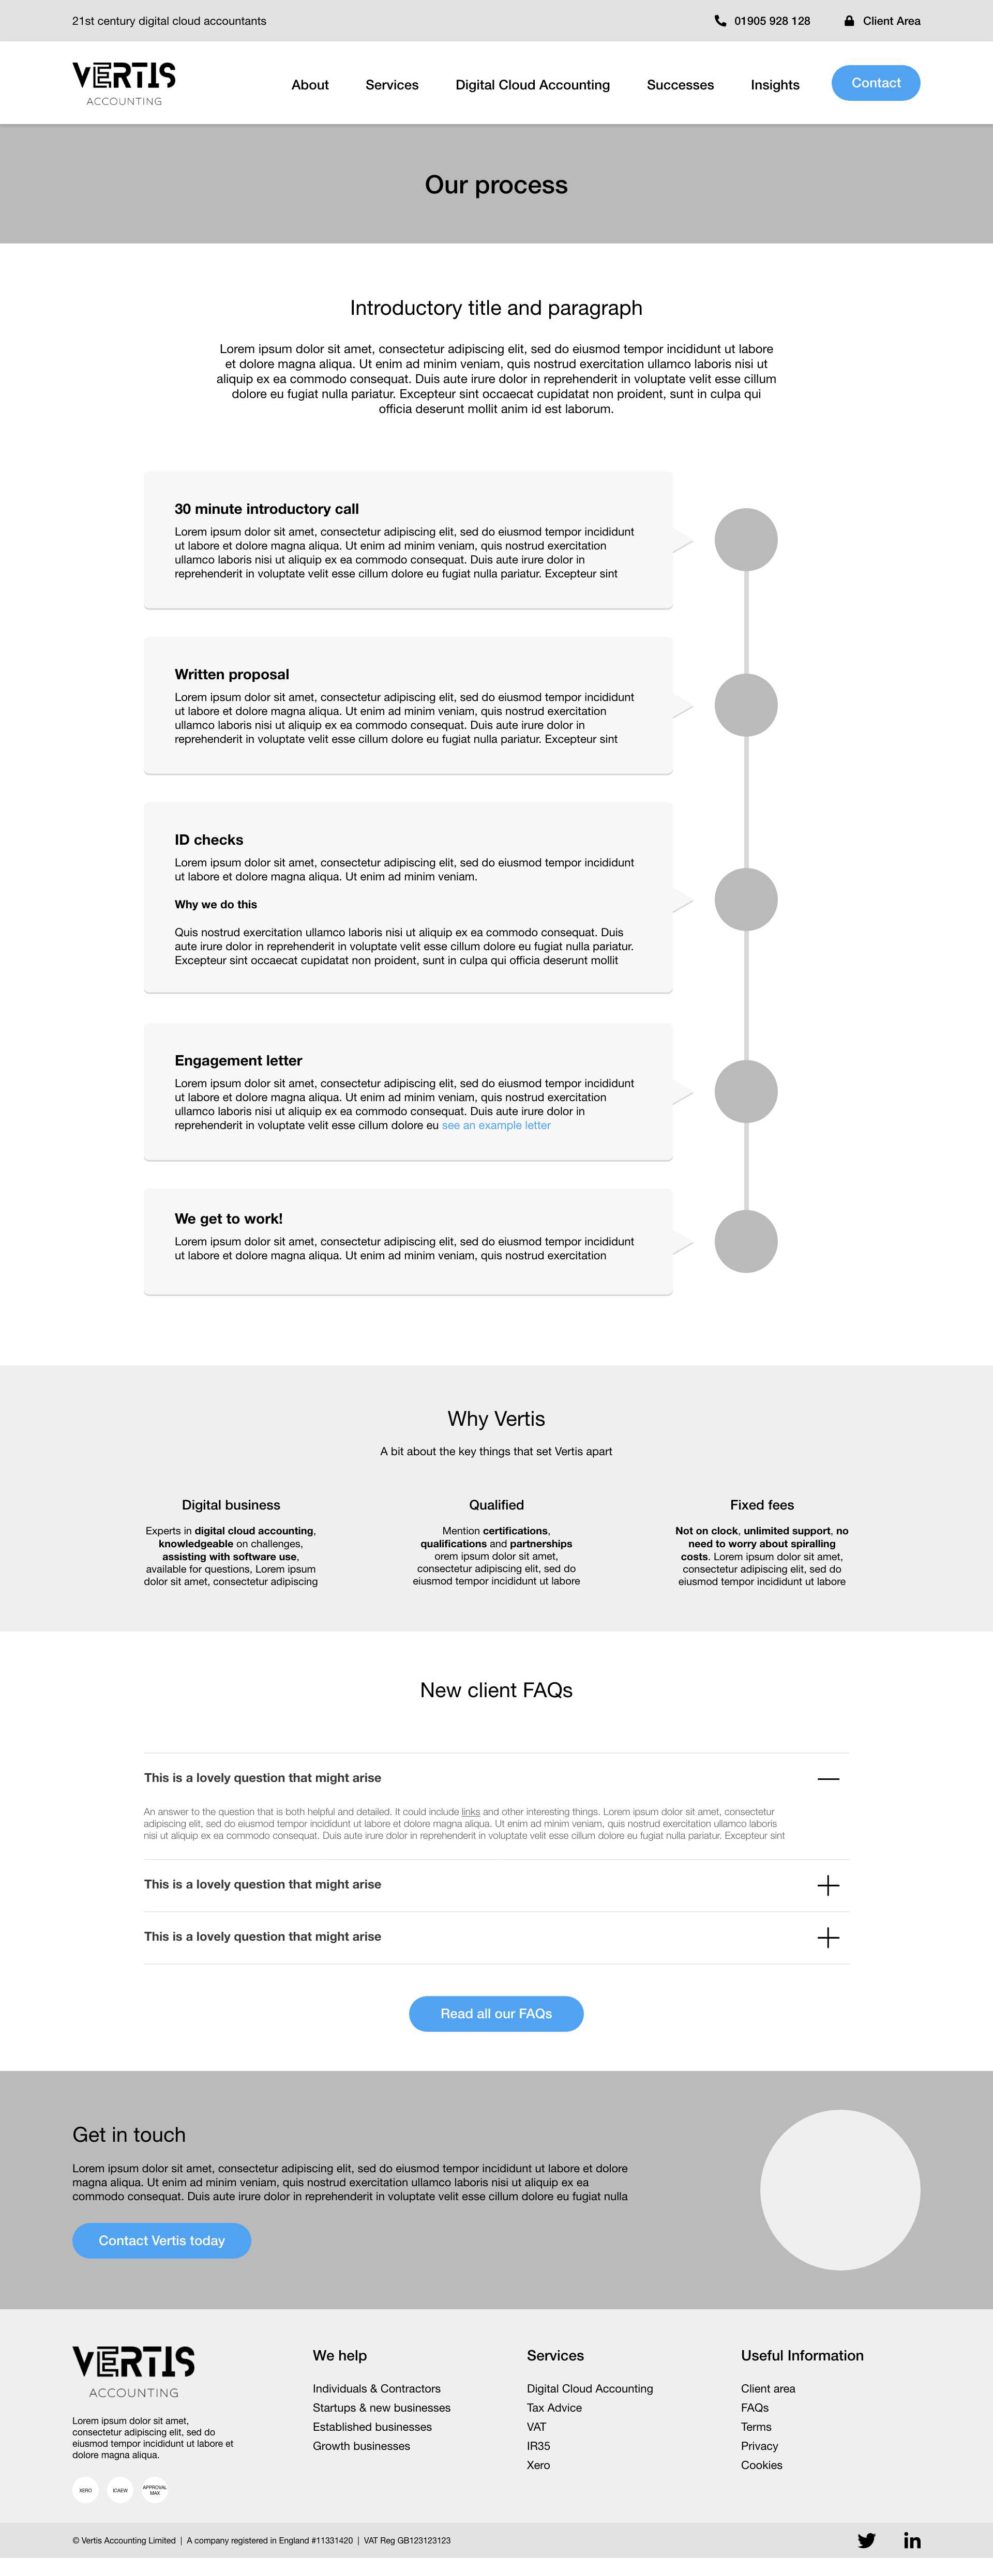 ethical-pixels-case-study-vertis-accounting-process-wireframe